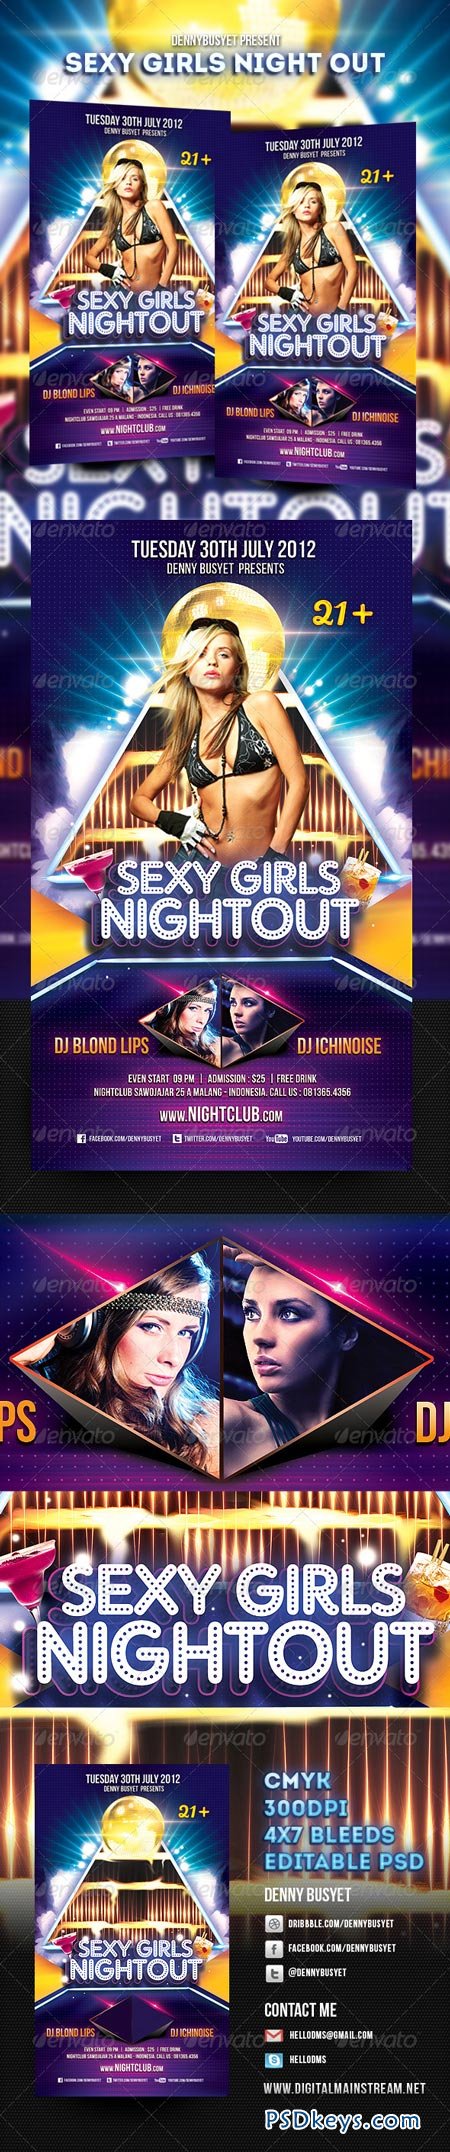 Sexy Girls Night Out Flyer 2618316